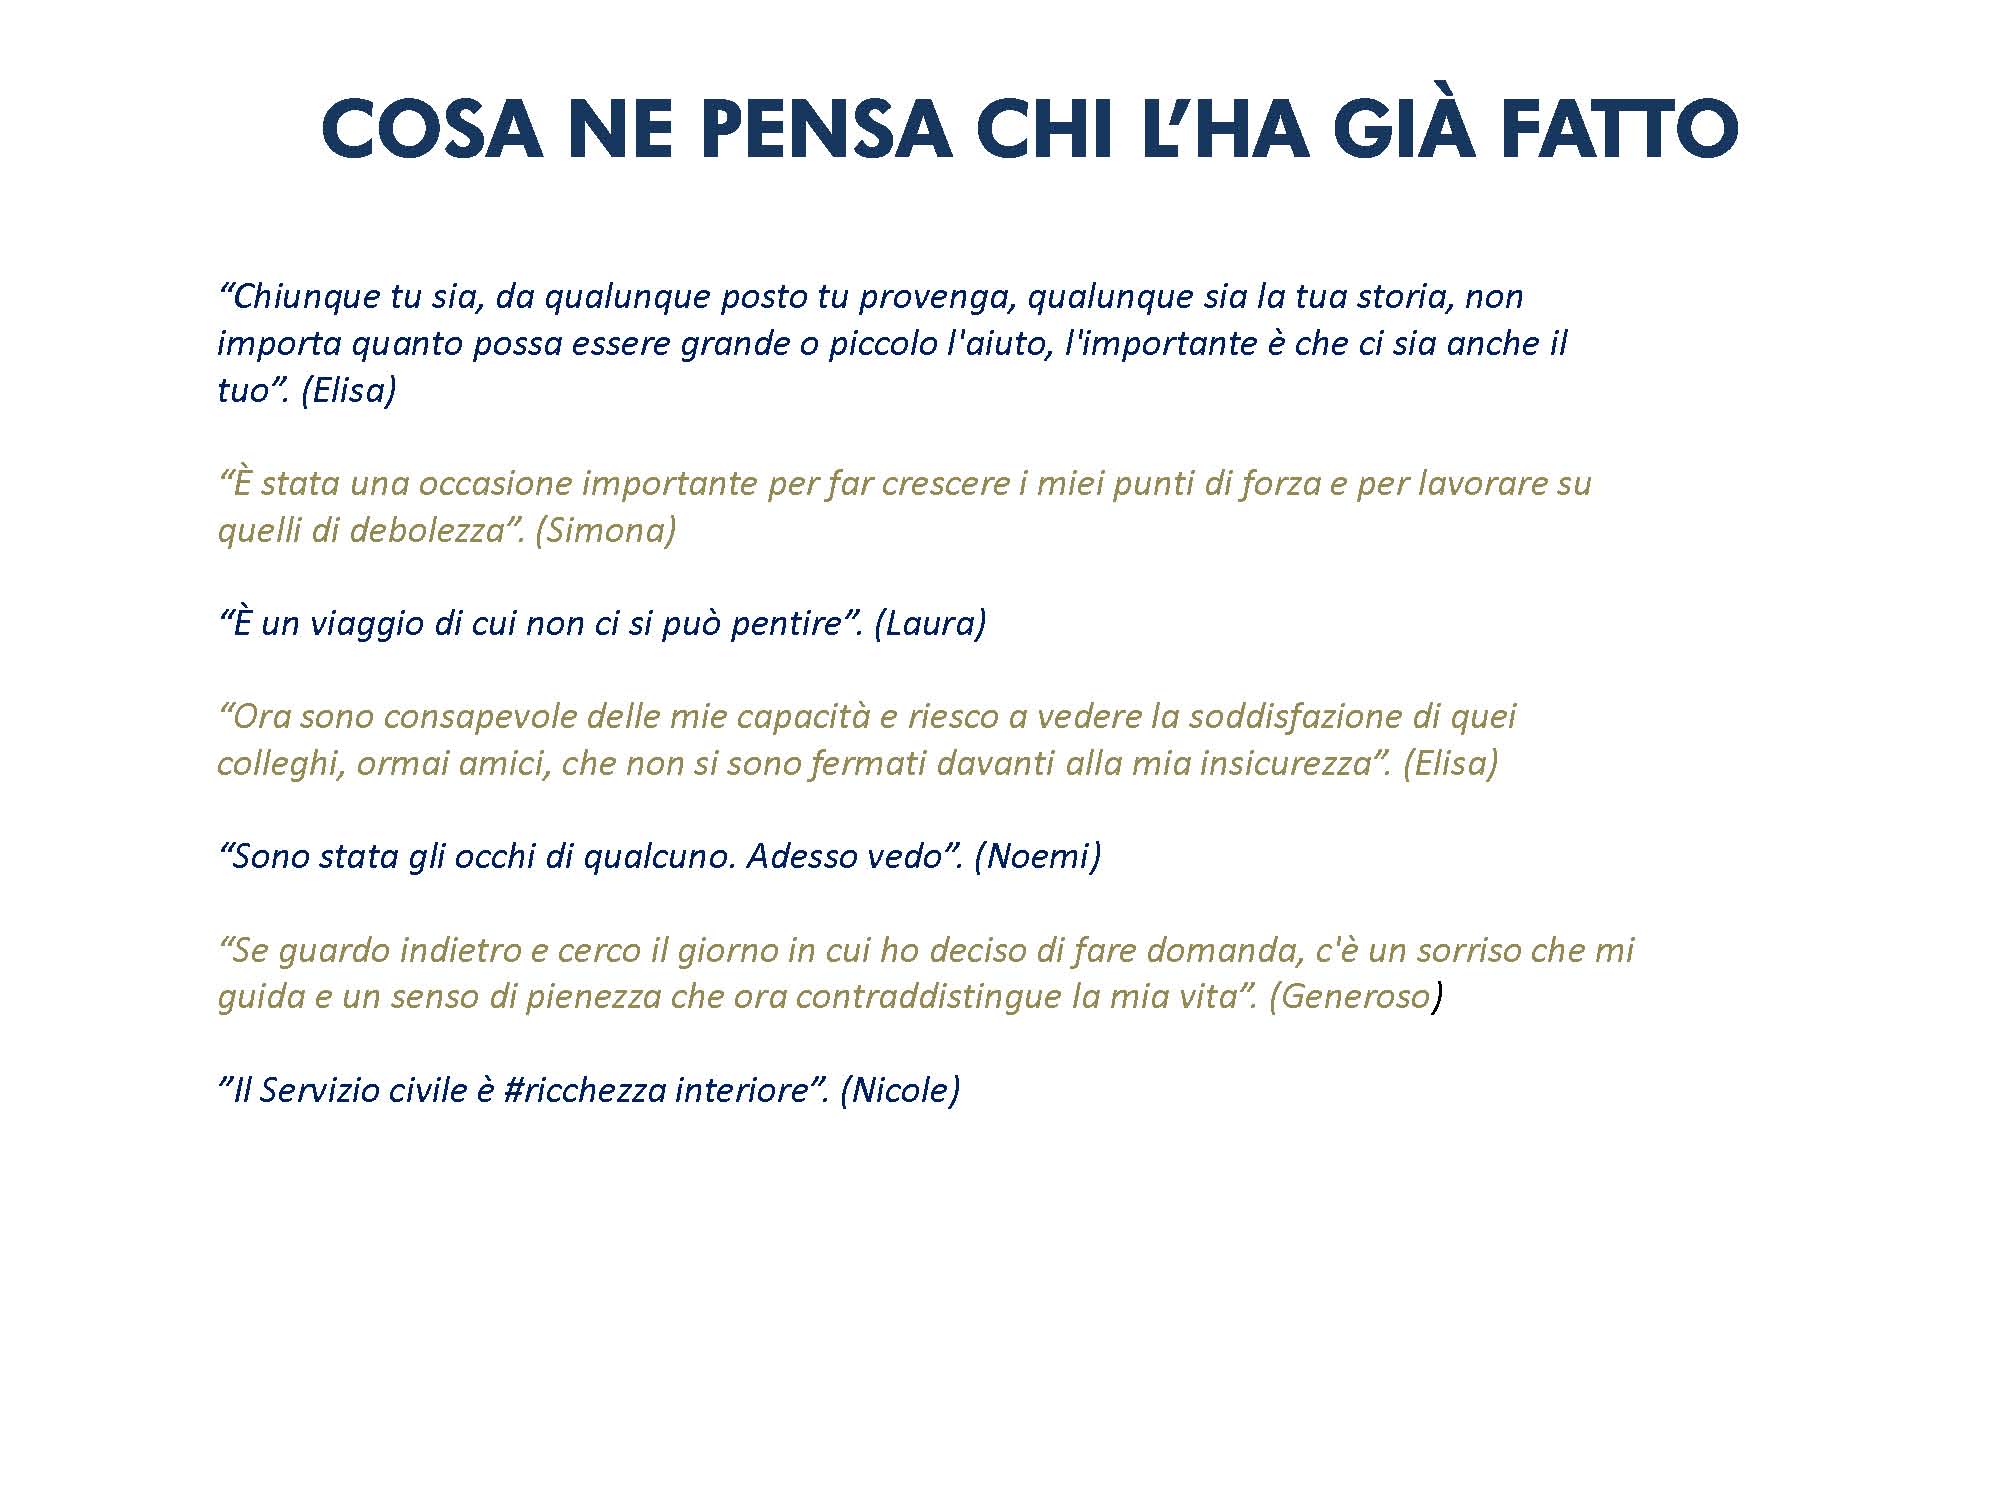 opuscolo2019_Page_05